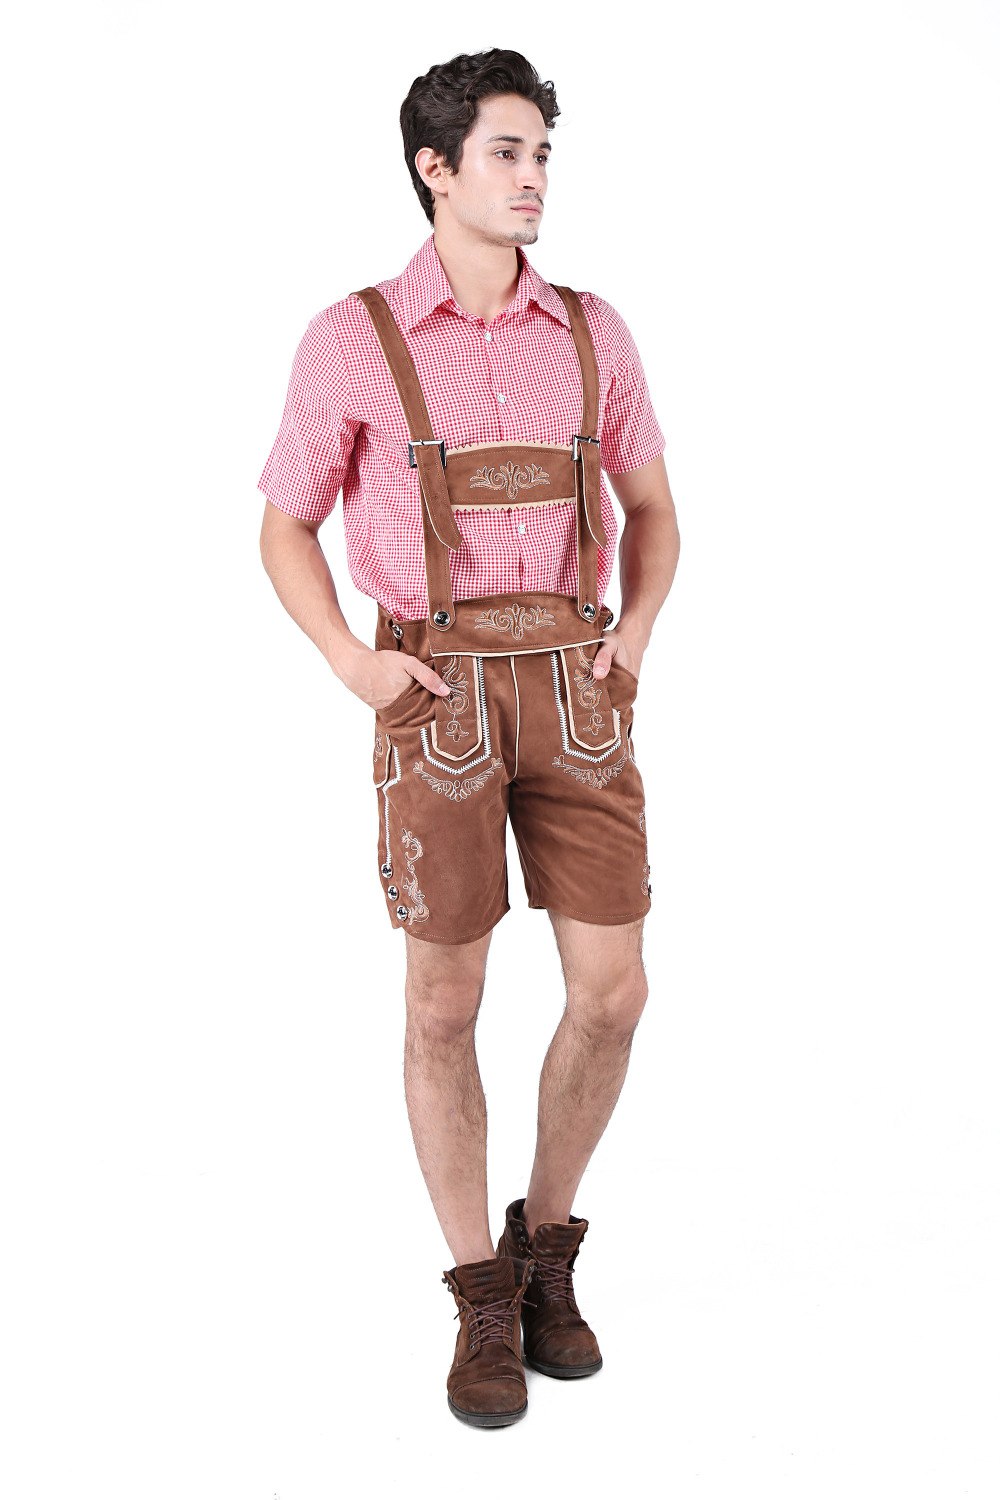 Leather Lenderhosen with red plaid shirt and thick-soled shoes.